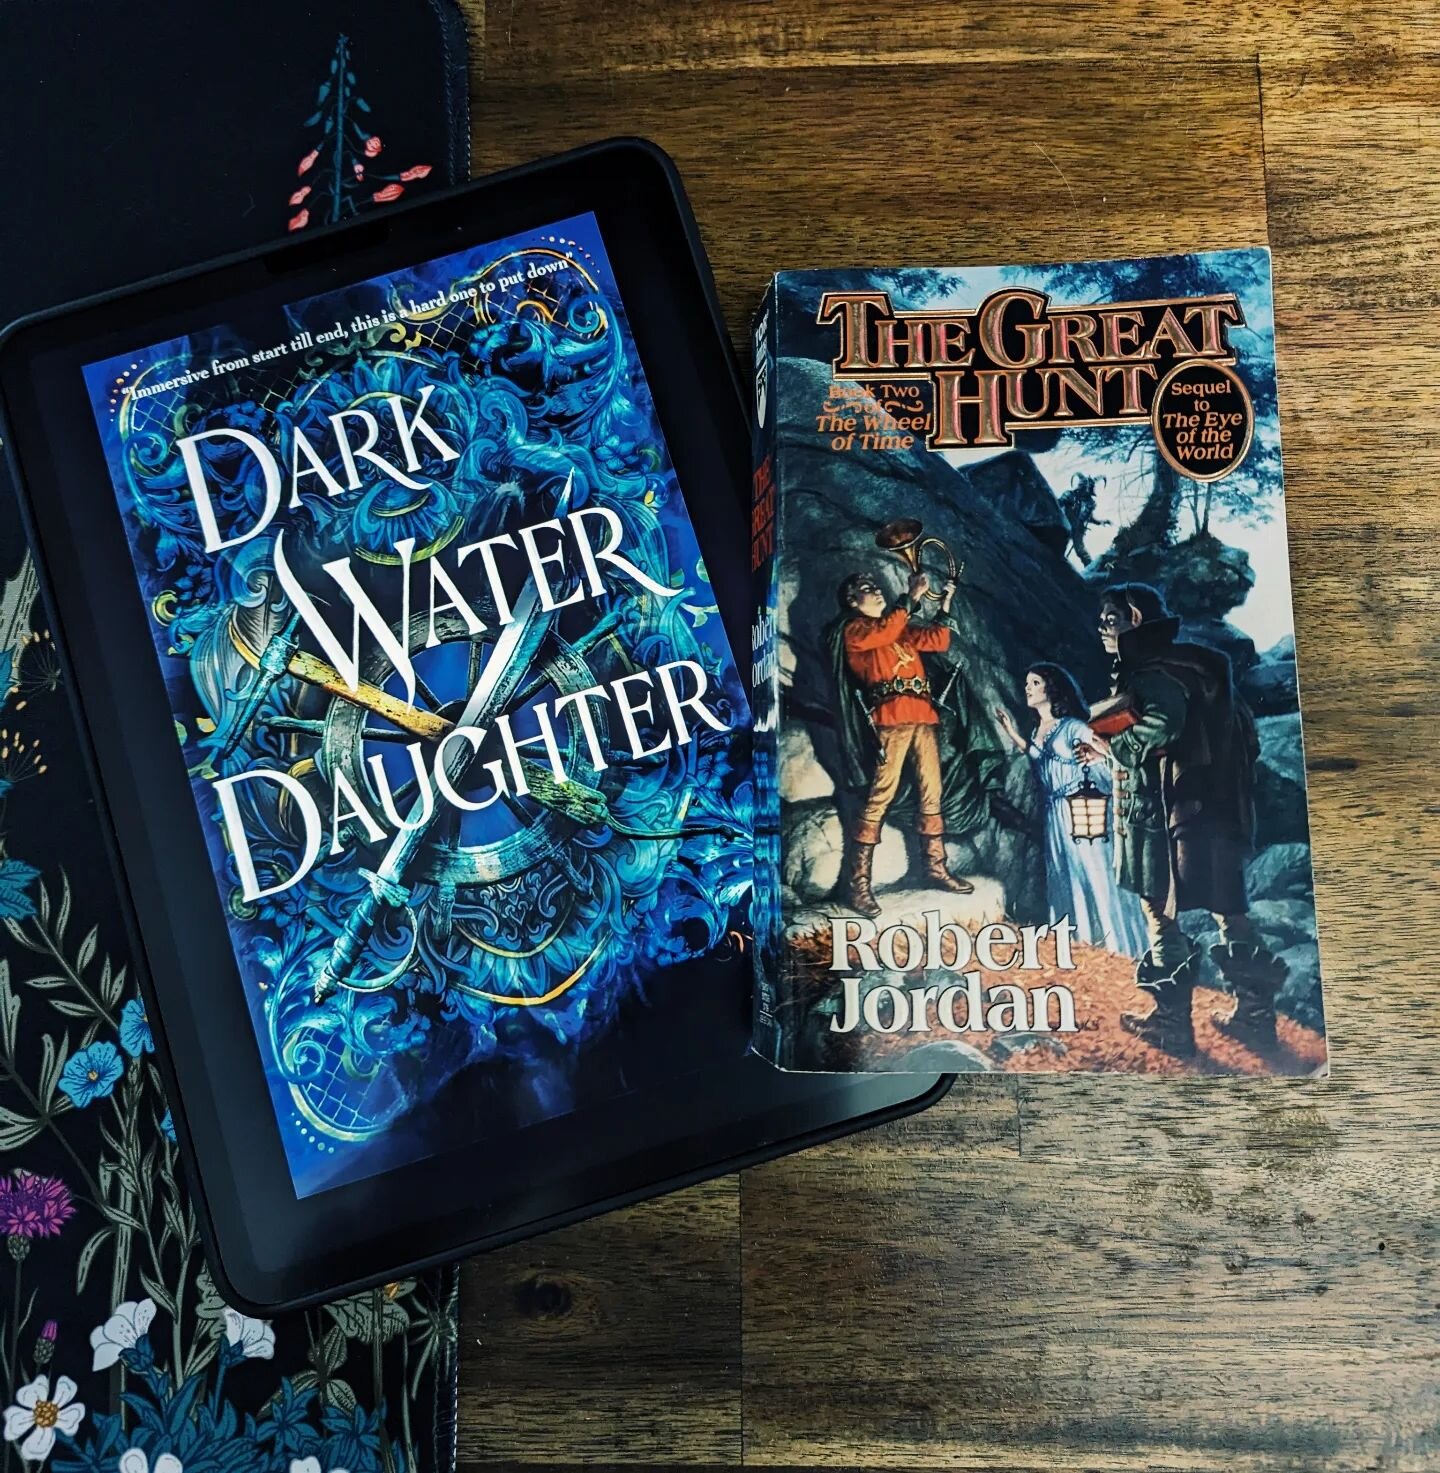 What are you reading this weekend? 

I'm currently reading the ebook of Dark Water Daughter and the audiobook of The Great Hunt. Both of them are great so far. 

#currentlyreading #weekendreading #bookstagram #darkwaterdaughter #hmlongbooks #thegreat